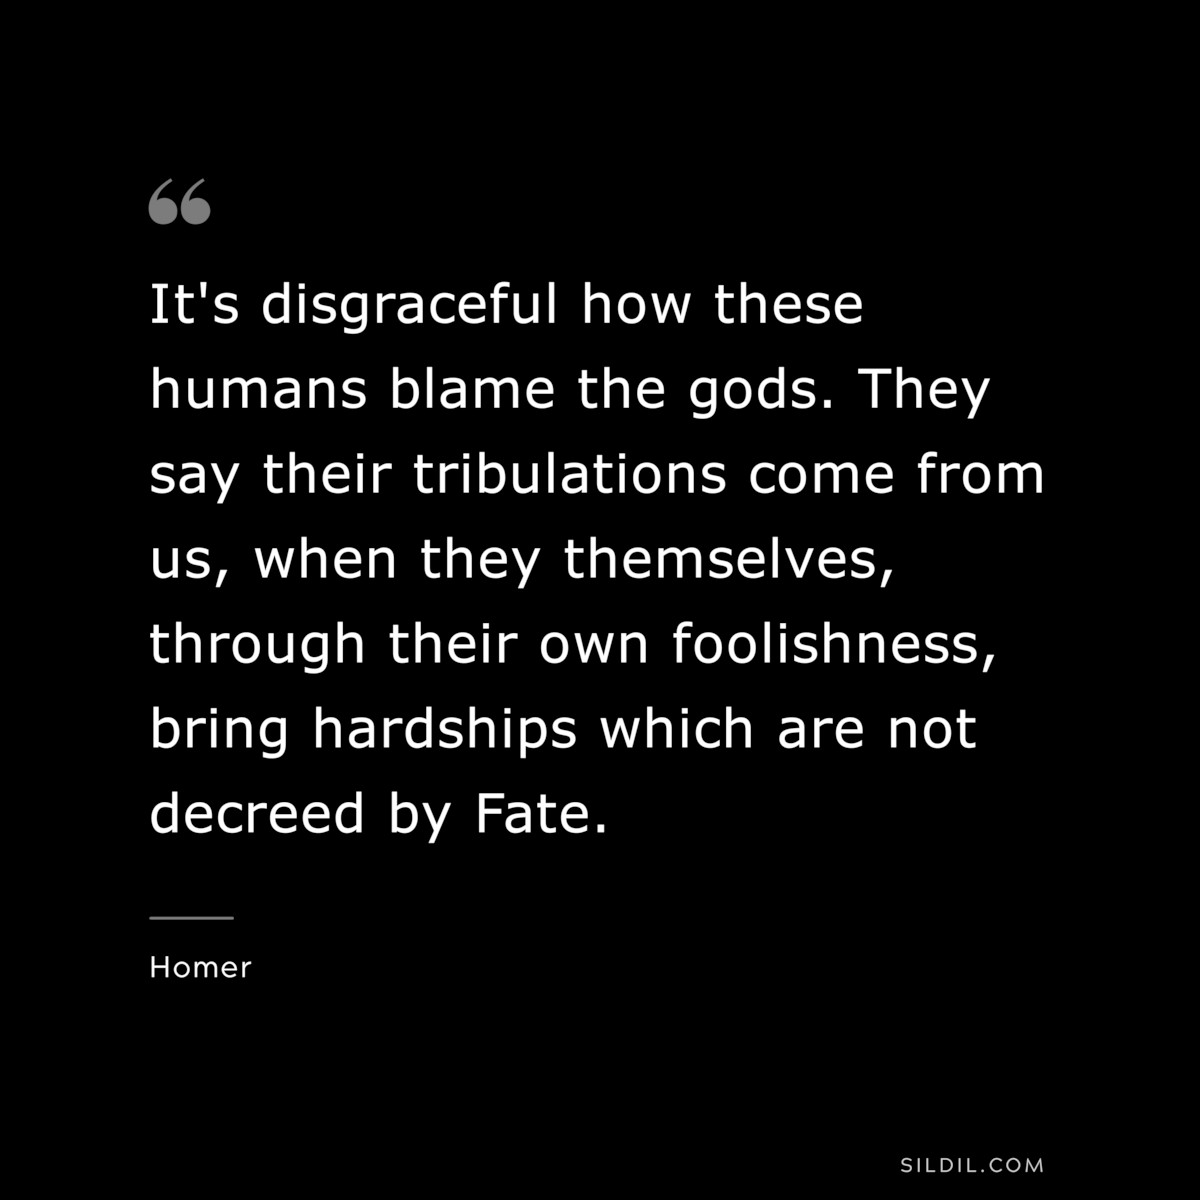 It's disgraceful how these humans blame the gods. They say their tribulations come from us, when they themselves, through their own foolishness, bring hardships which are not decreed by Fate. ― Homer